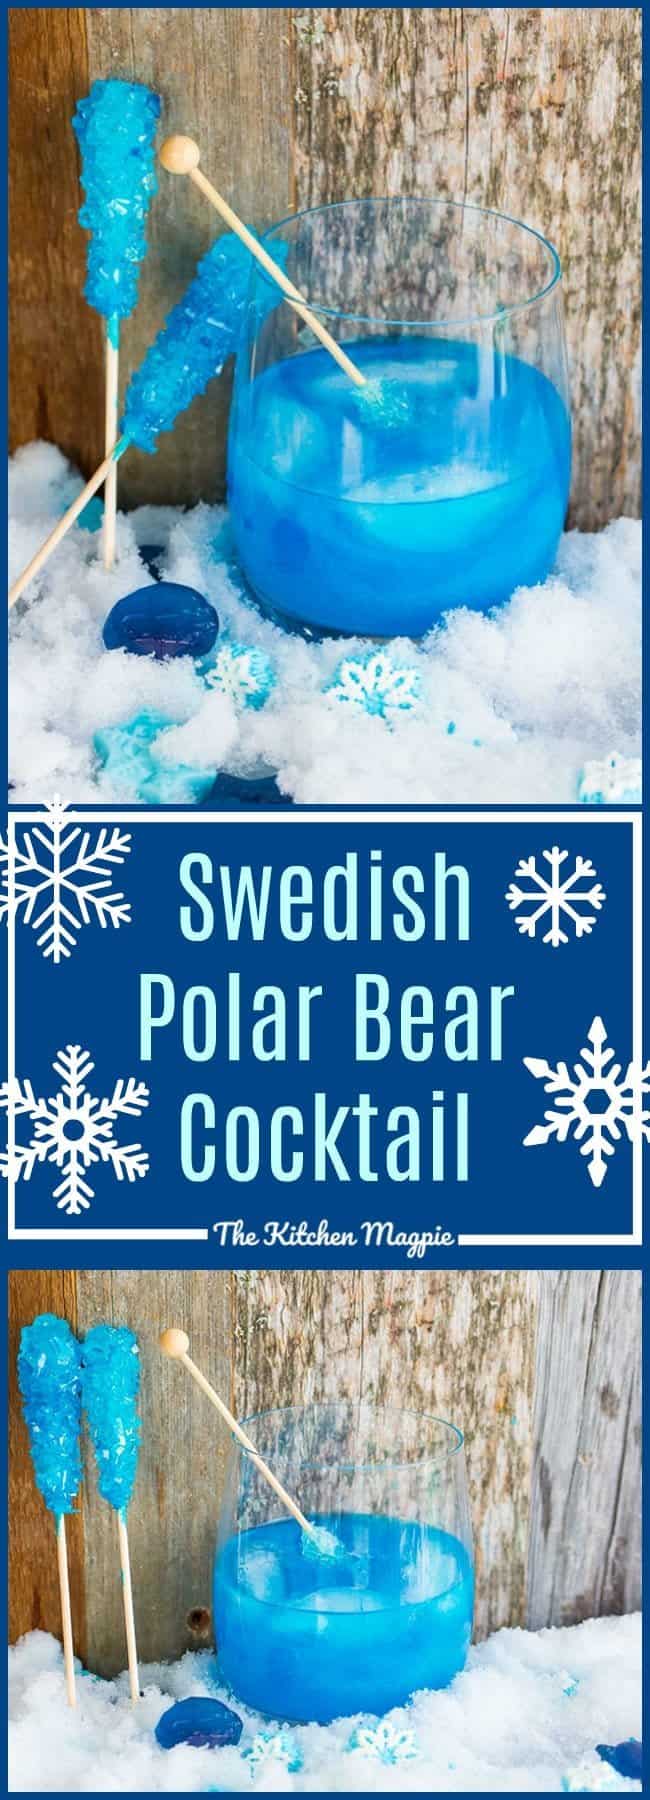 The Swedish Polar Bear Cocktail! This raspberry flavoured cocktail is THE cocktail for your winter parties! Or Tuesdays, I don't judge! Recipe from @kitchenmagpie #cocktails #christmas #raspberry #recipe #booze #boozy #holidays #entertaining